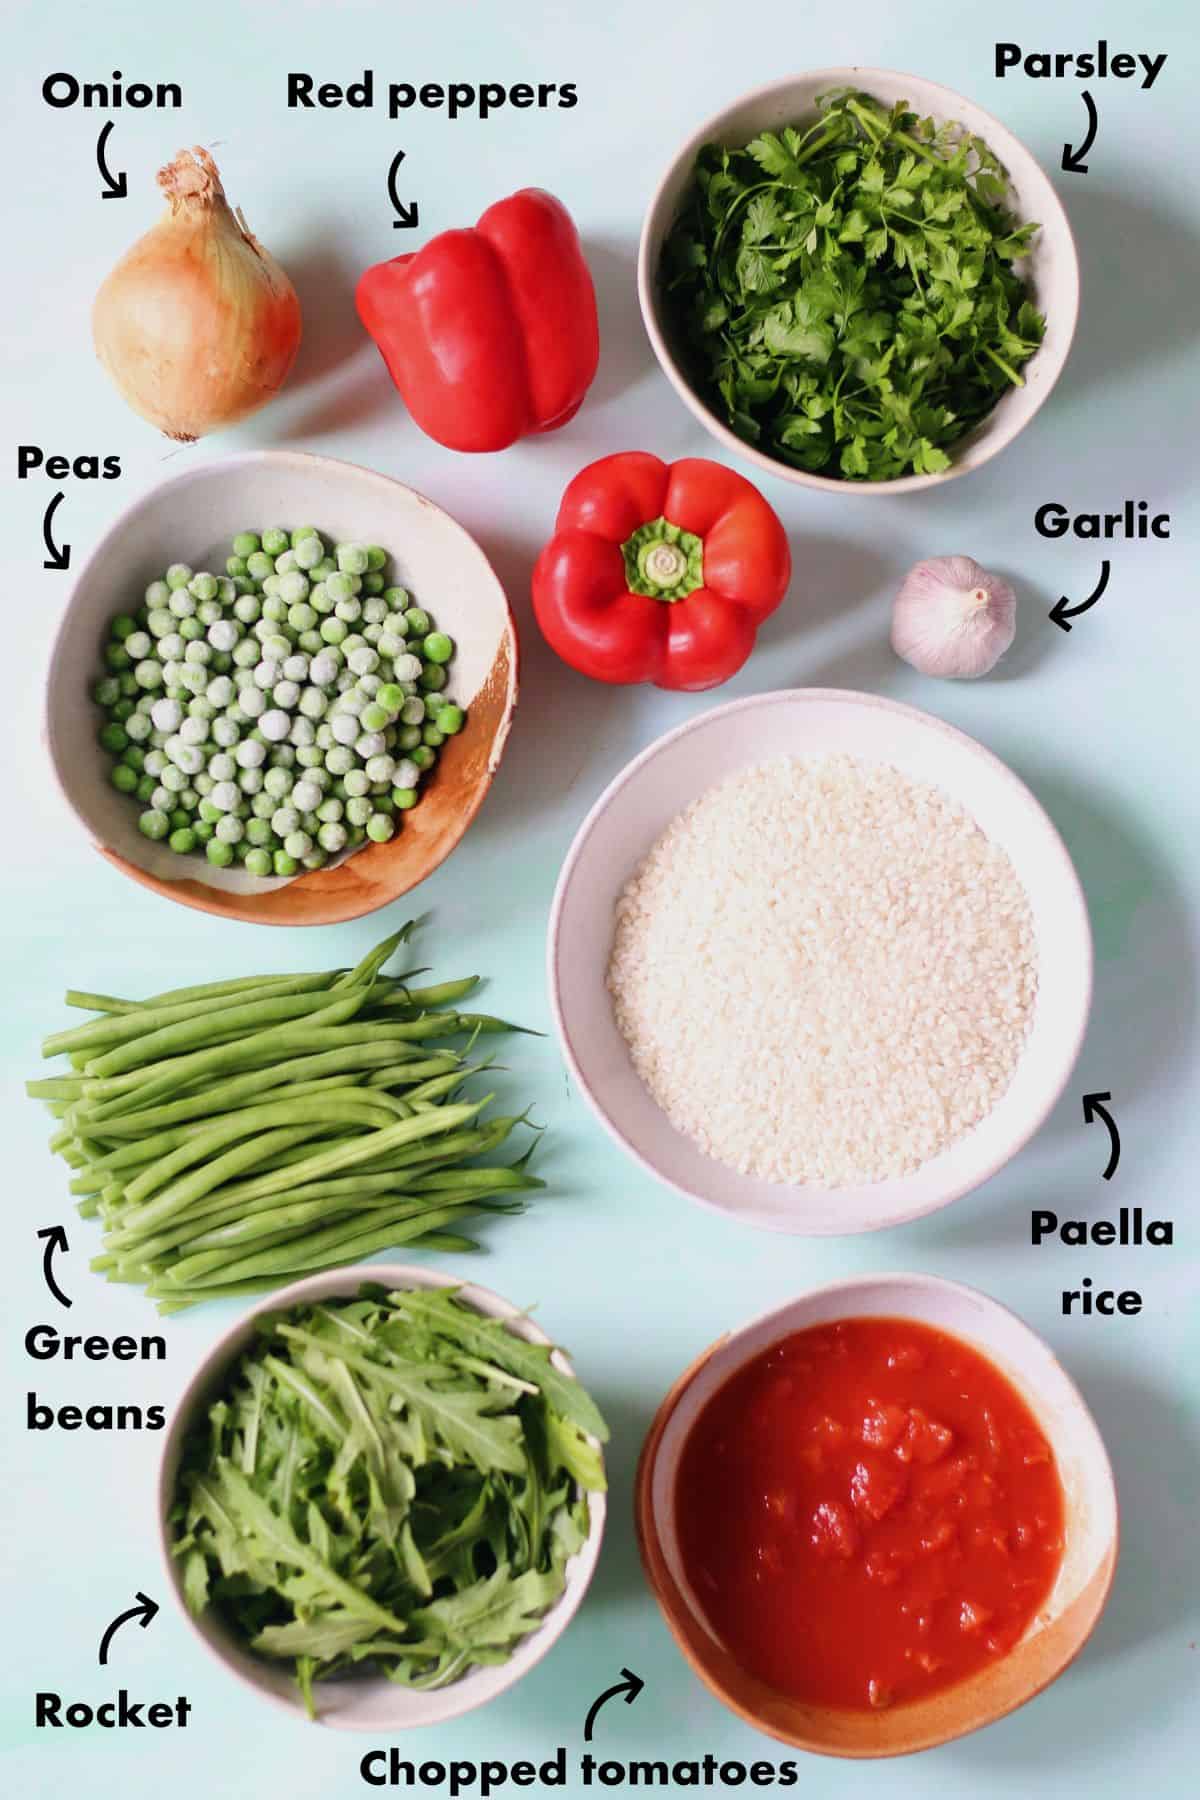 Over head shot of ingredients to make paella laid out on a pale blue background and labelled.